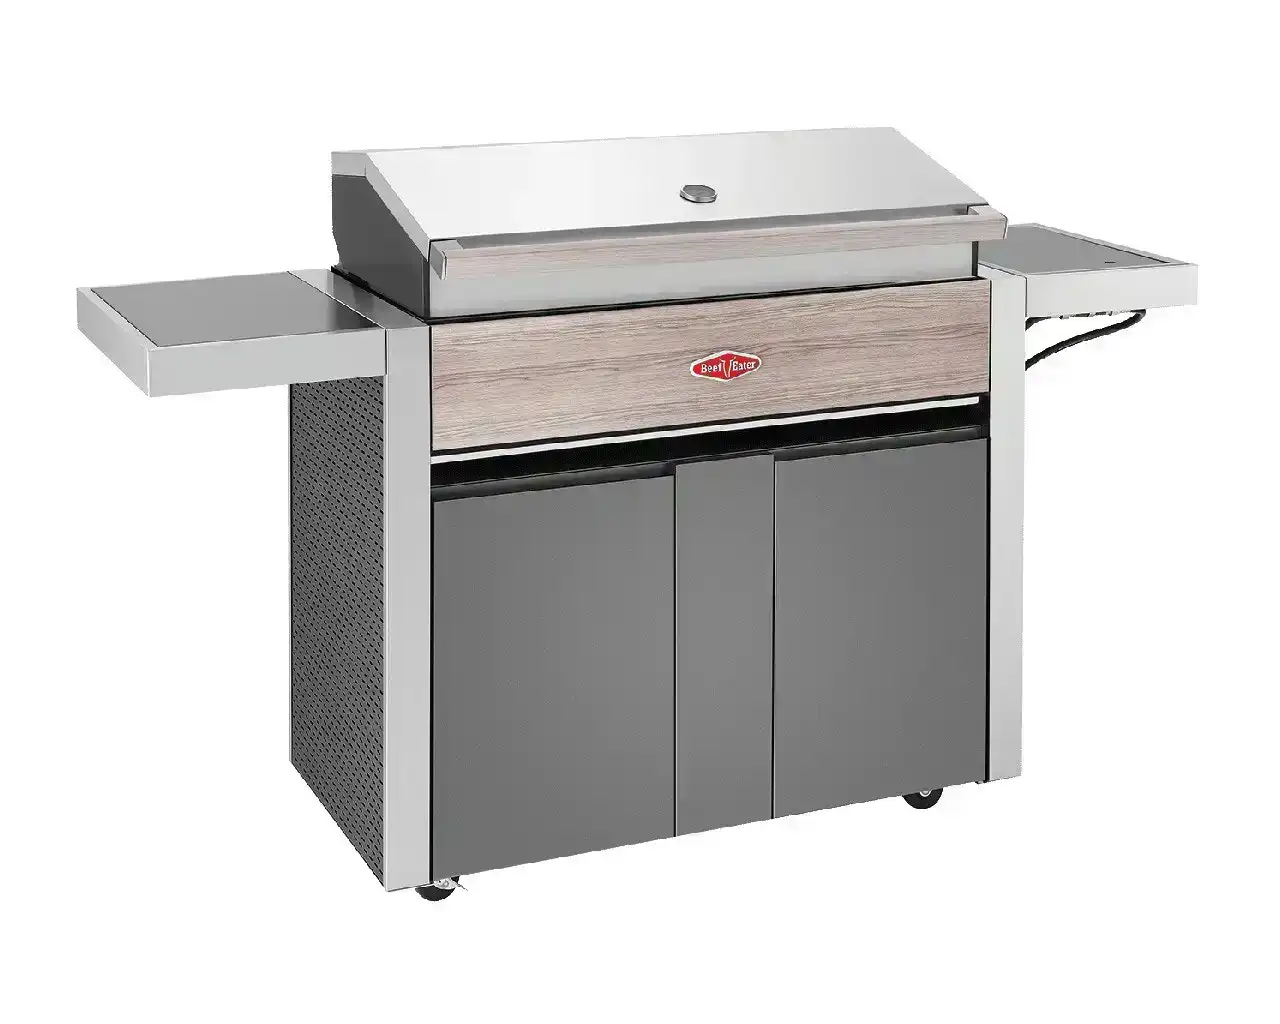 Beefeater 1500 Series - 5 Burner BBQ With Side Burner